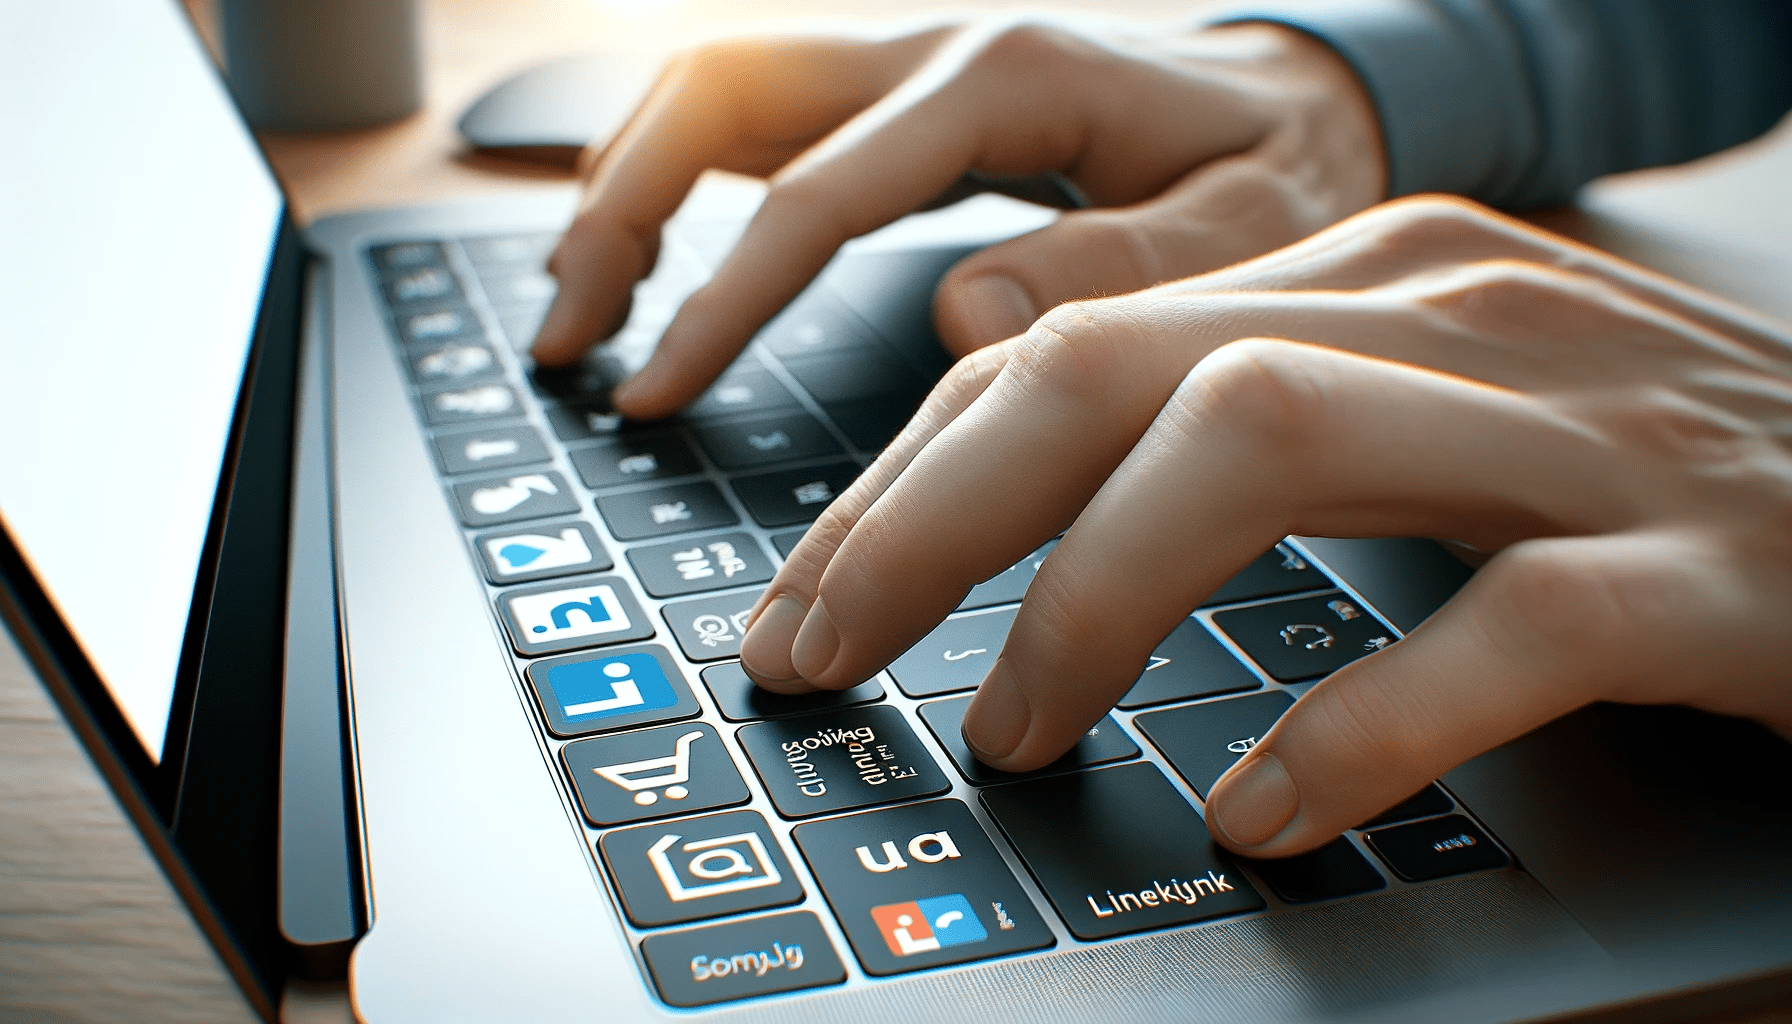 Hands typing on a laptop keyboard with LinkedIn and Google Analytics logo stickers on keys, setting up UTM tracking tags.